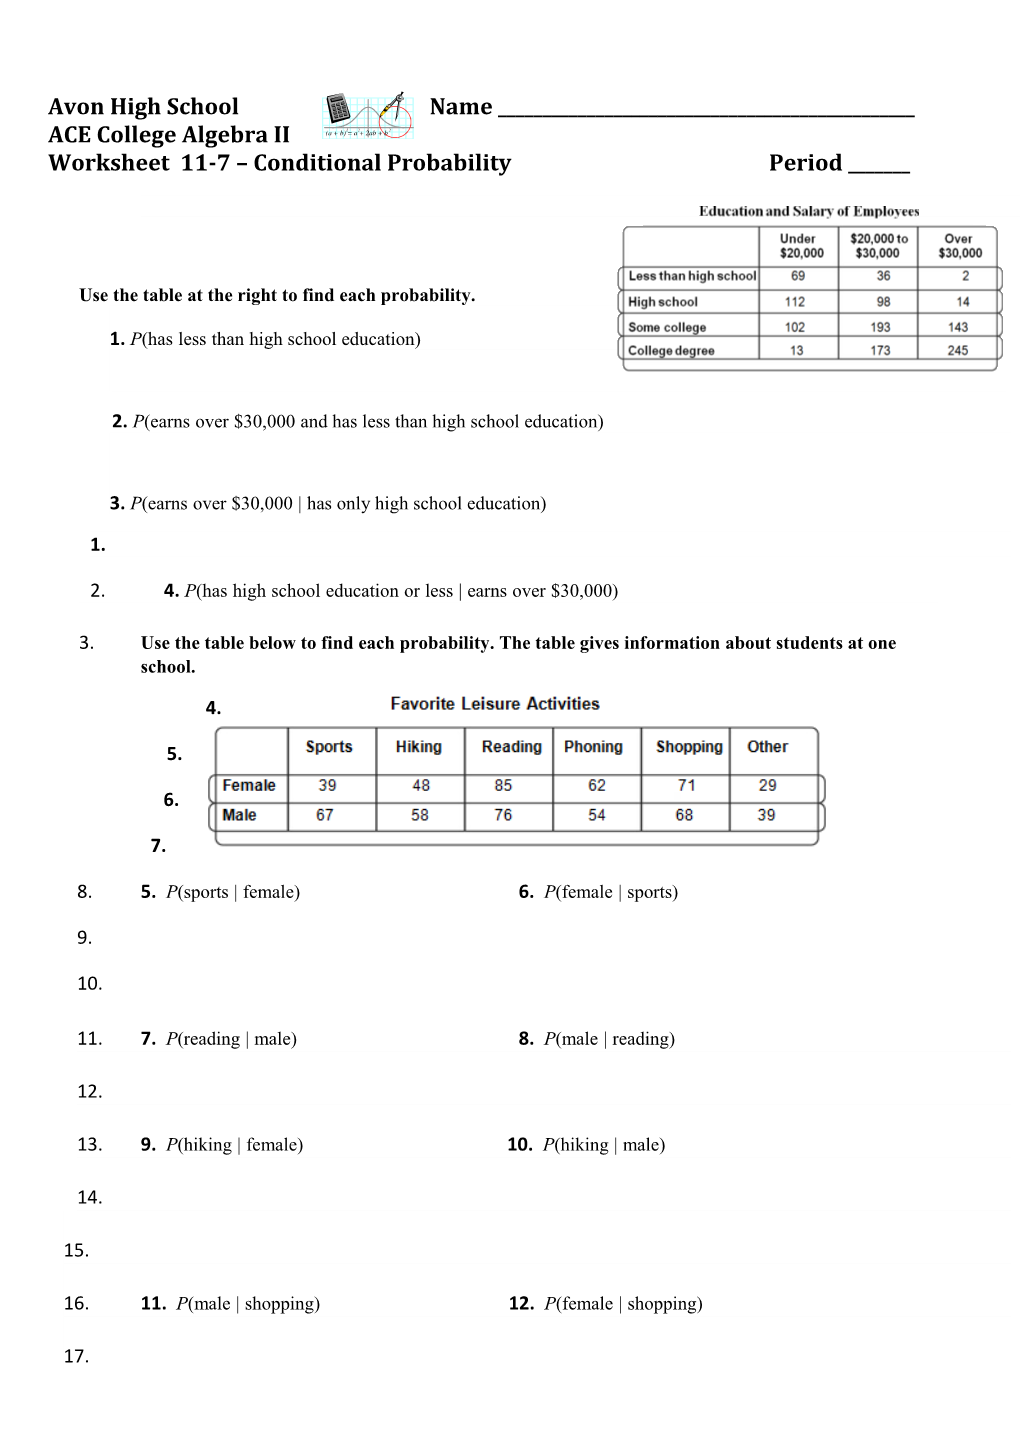 Worksheet 11-7 Conditional Probability Period ______